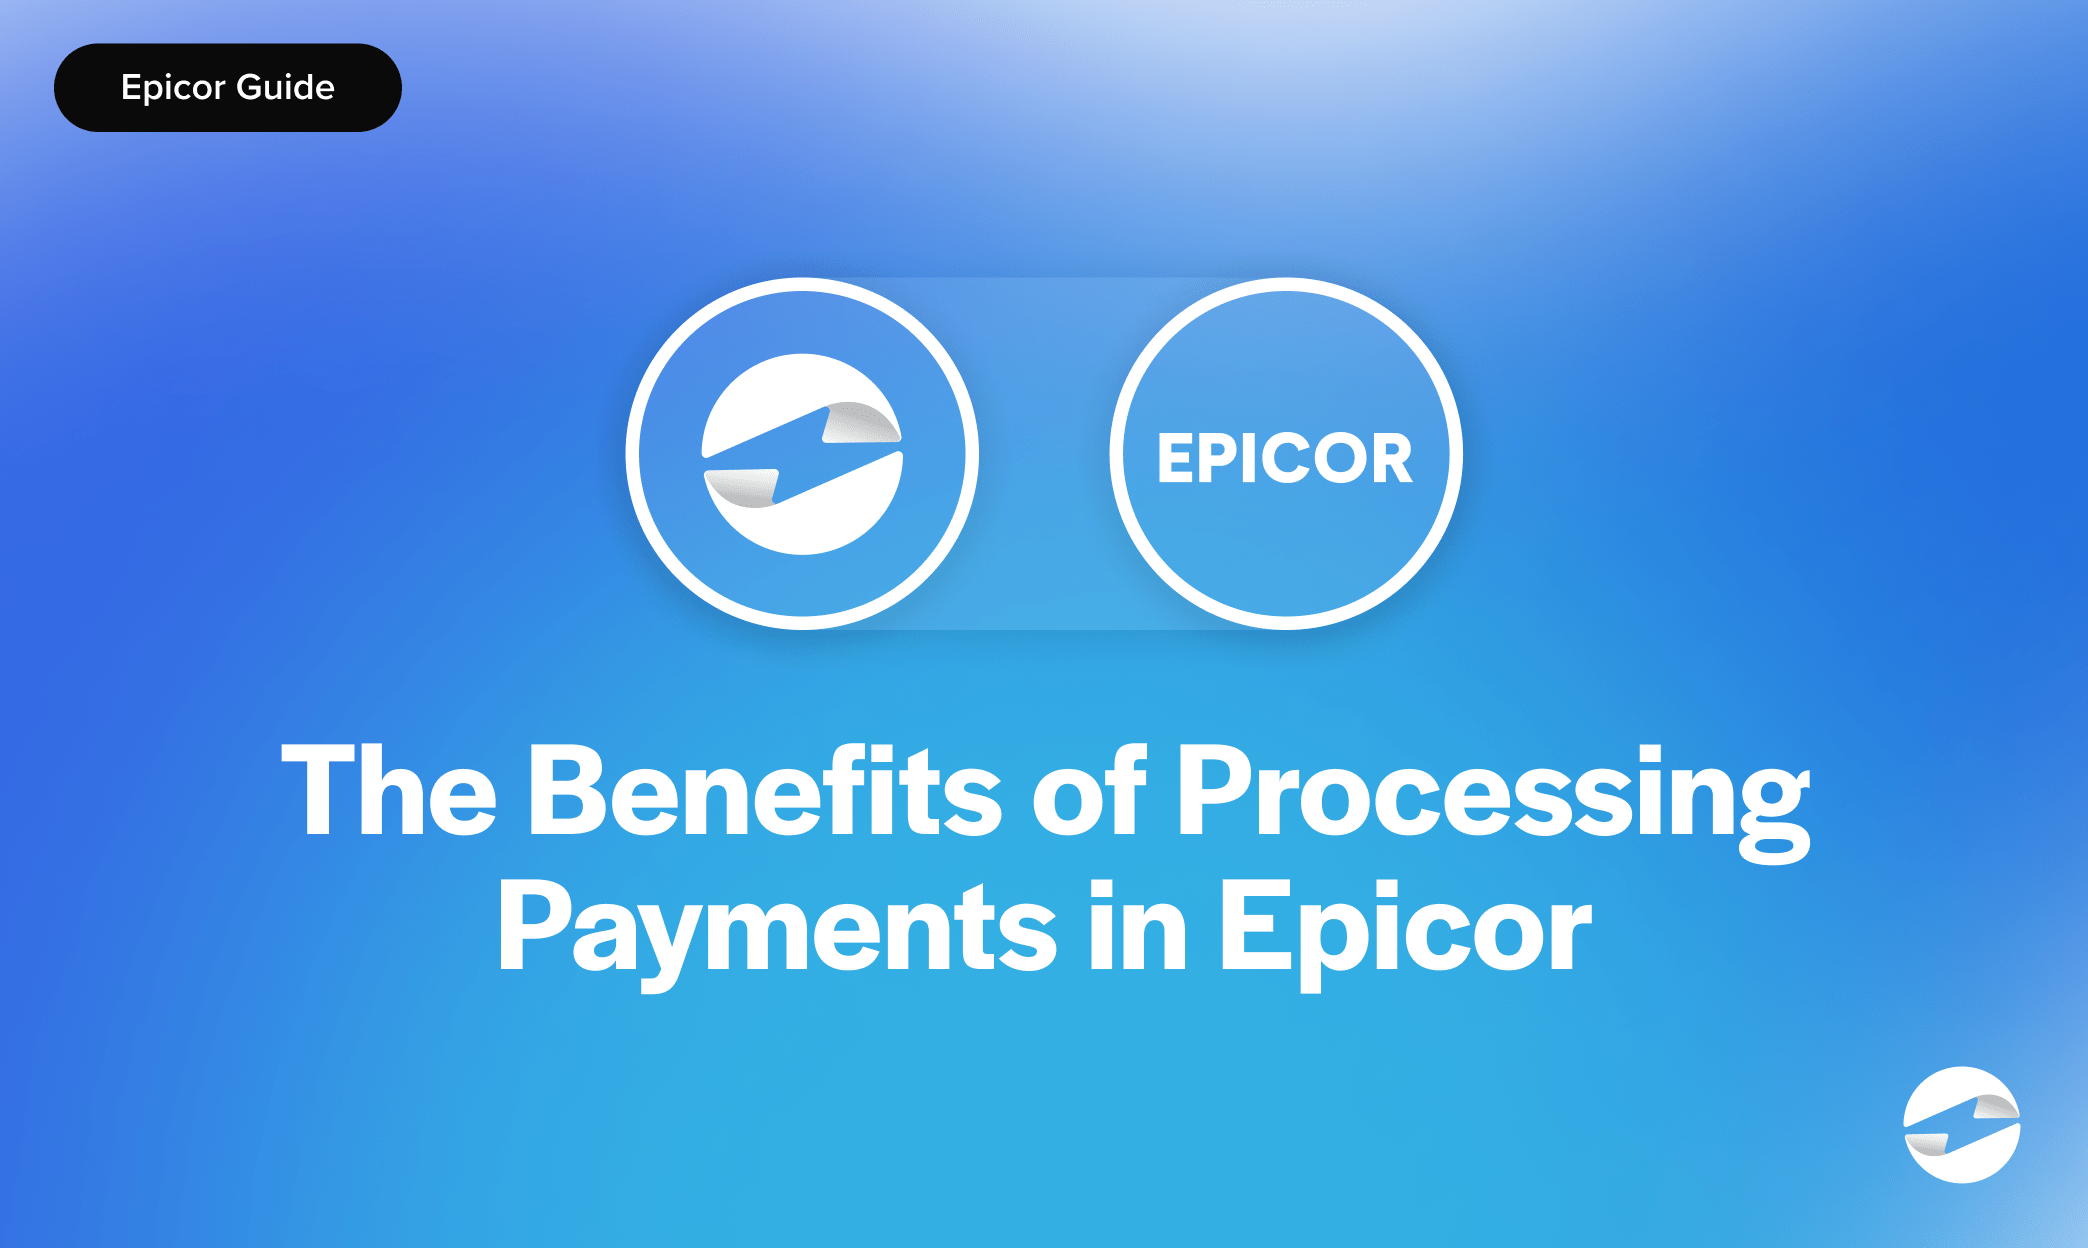 The Benefits of Processing Payments in Epicor